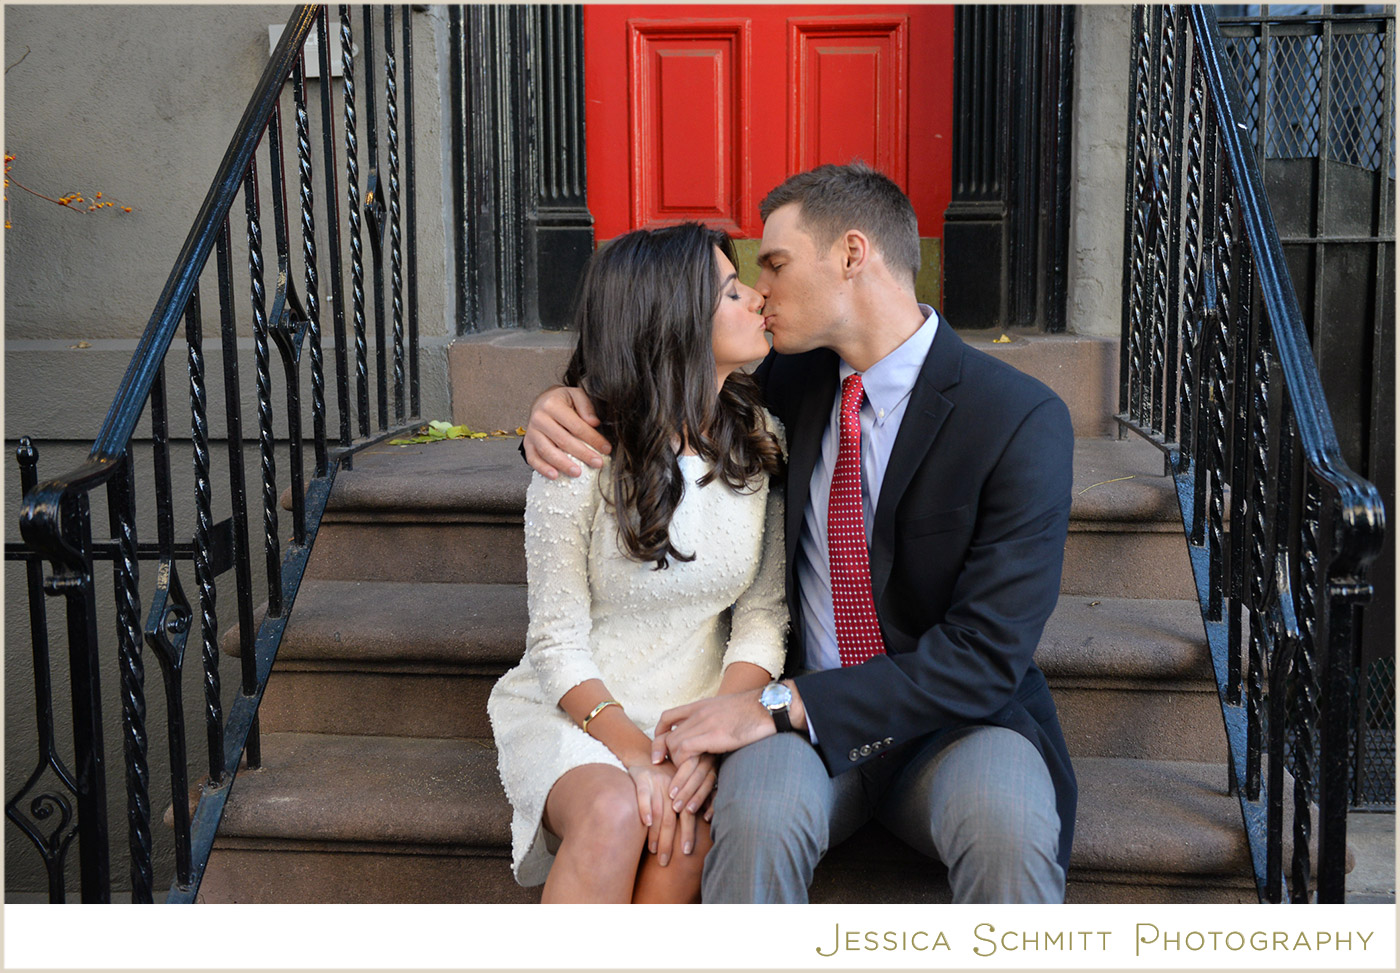 greenwich village nyc engagement photography